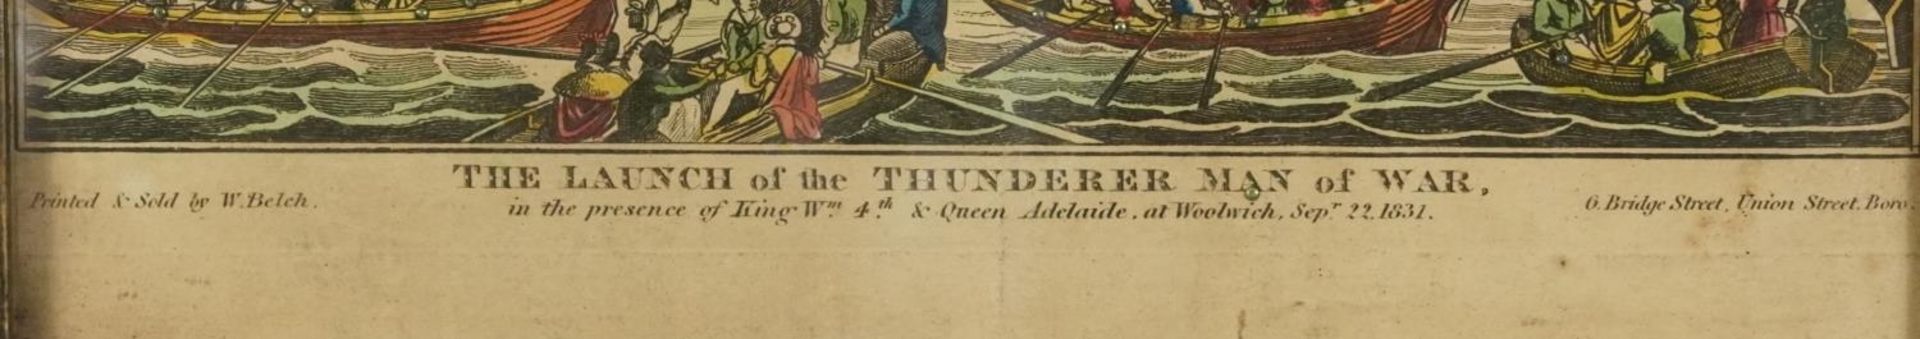 The Launch of the Thunderer Man of War, 19th century embellished engraving in colour, printed by - Image 6 of 8